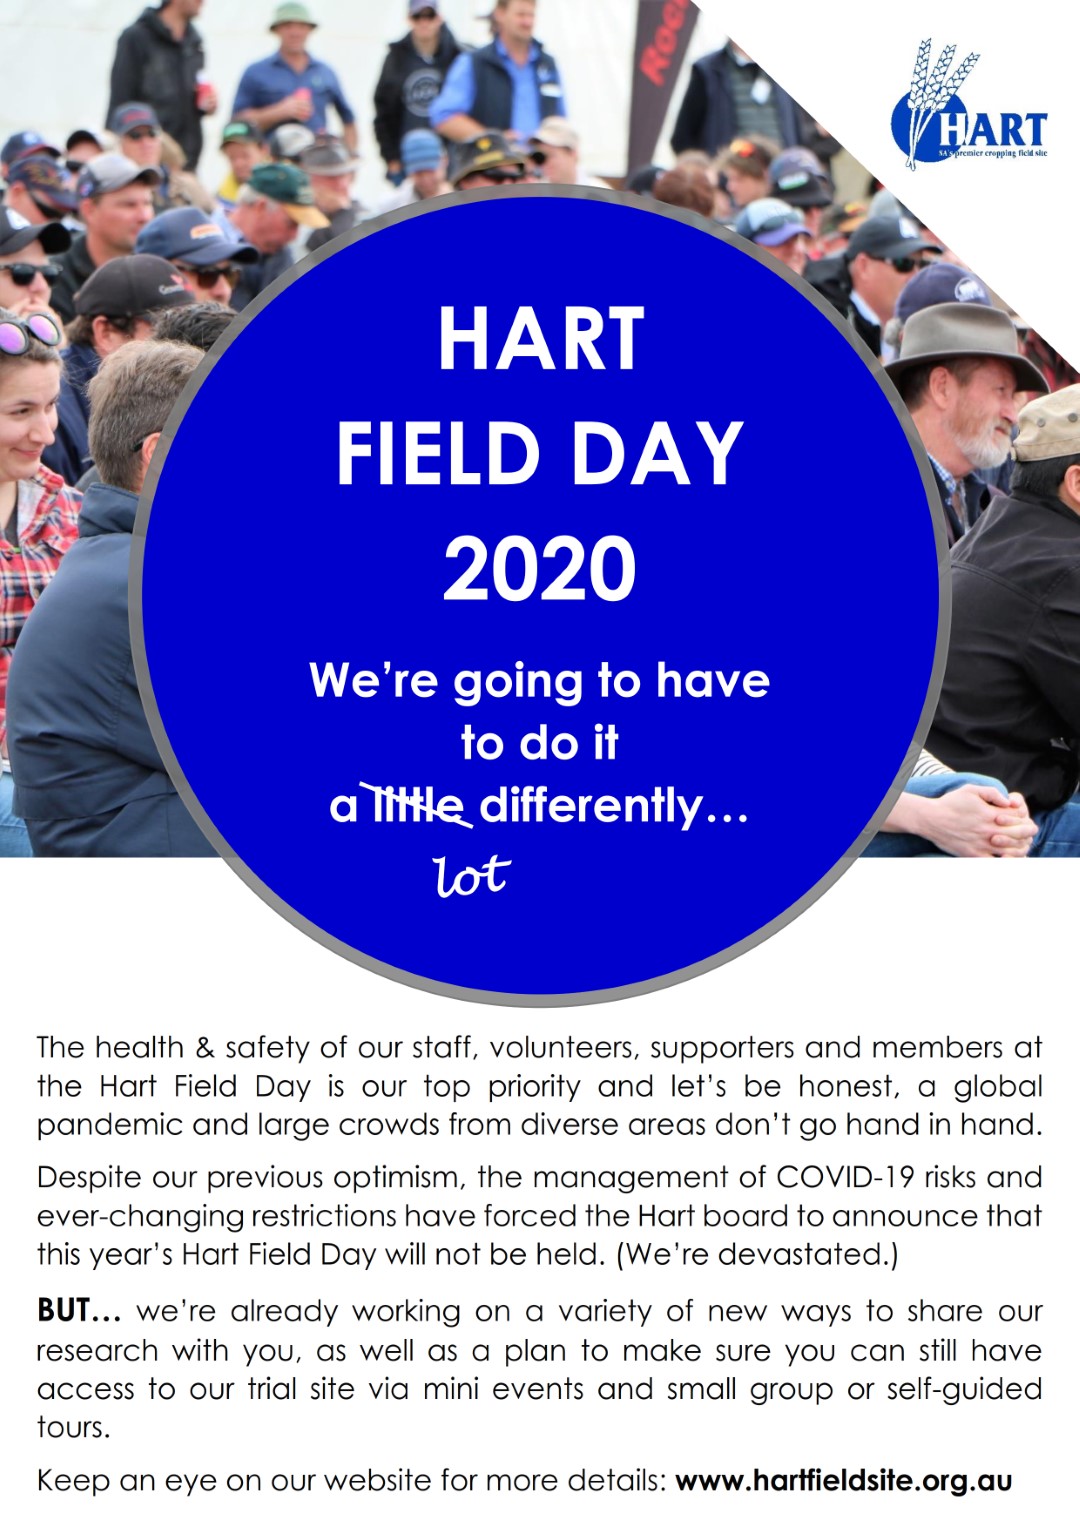 Hart Field Day 2020 - it's going to look a little different